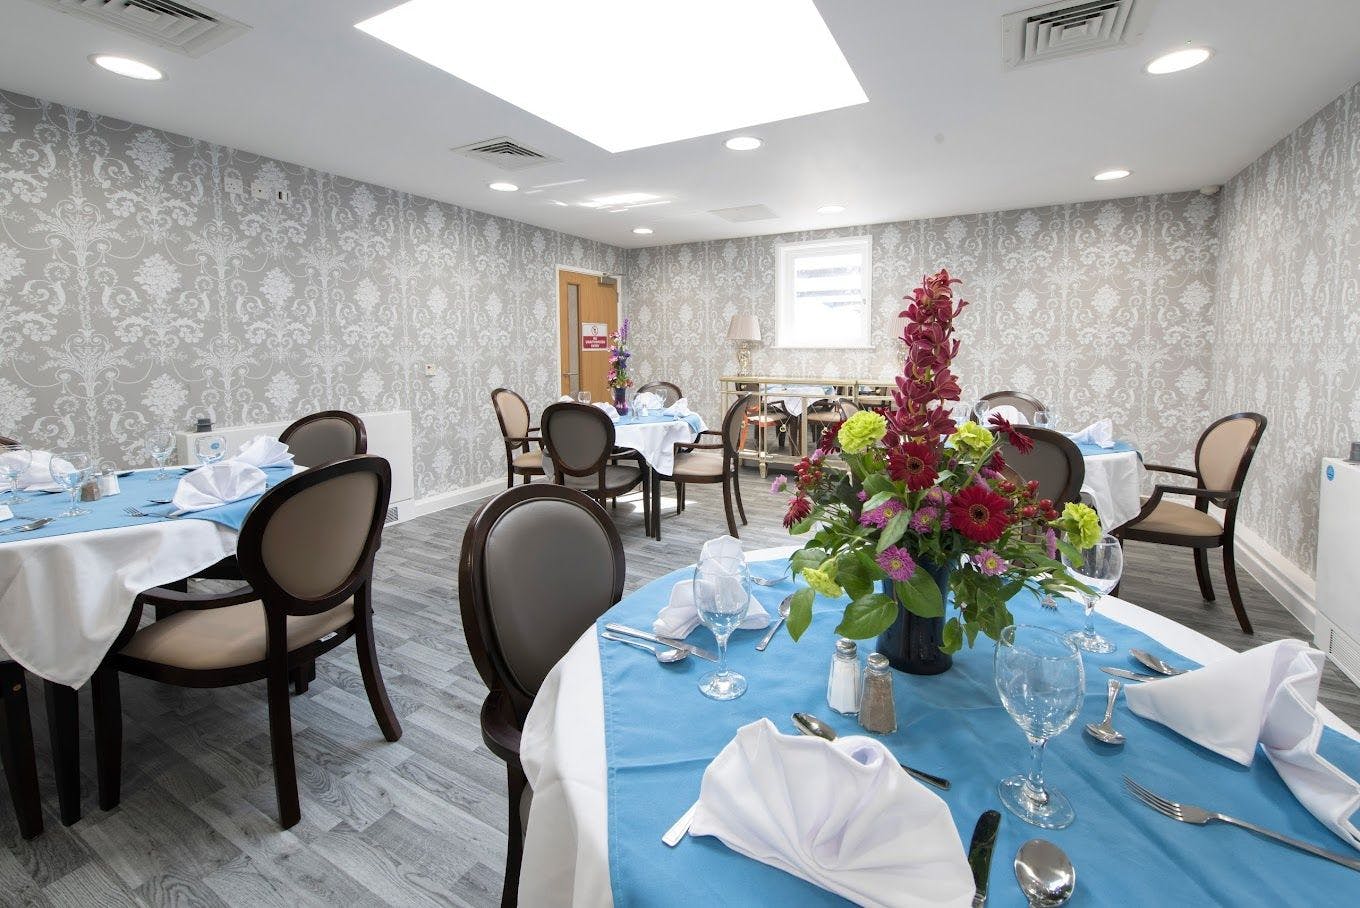 Dining area of Chocolate Works care village in York, Yorkshire